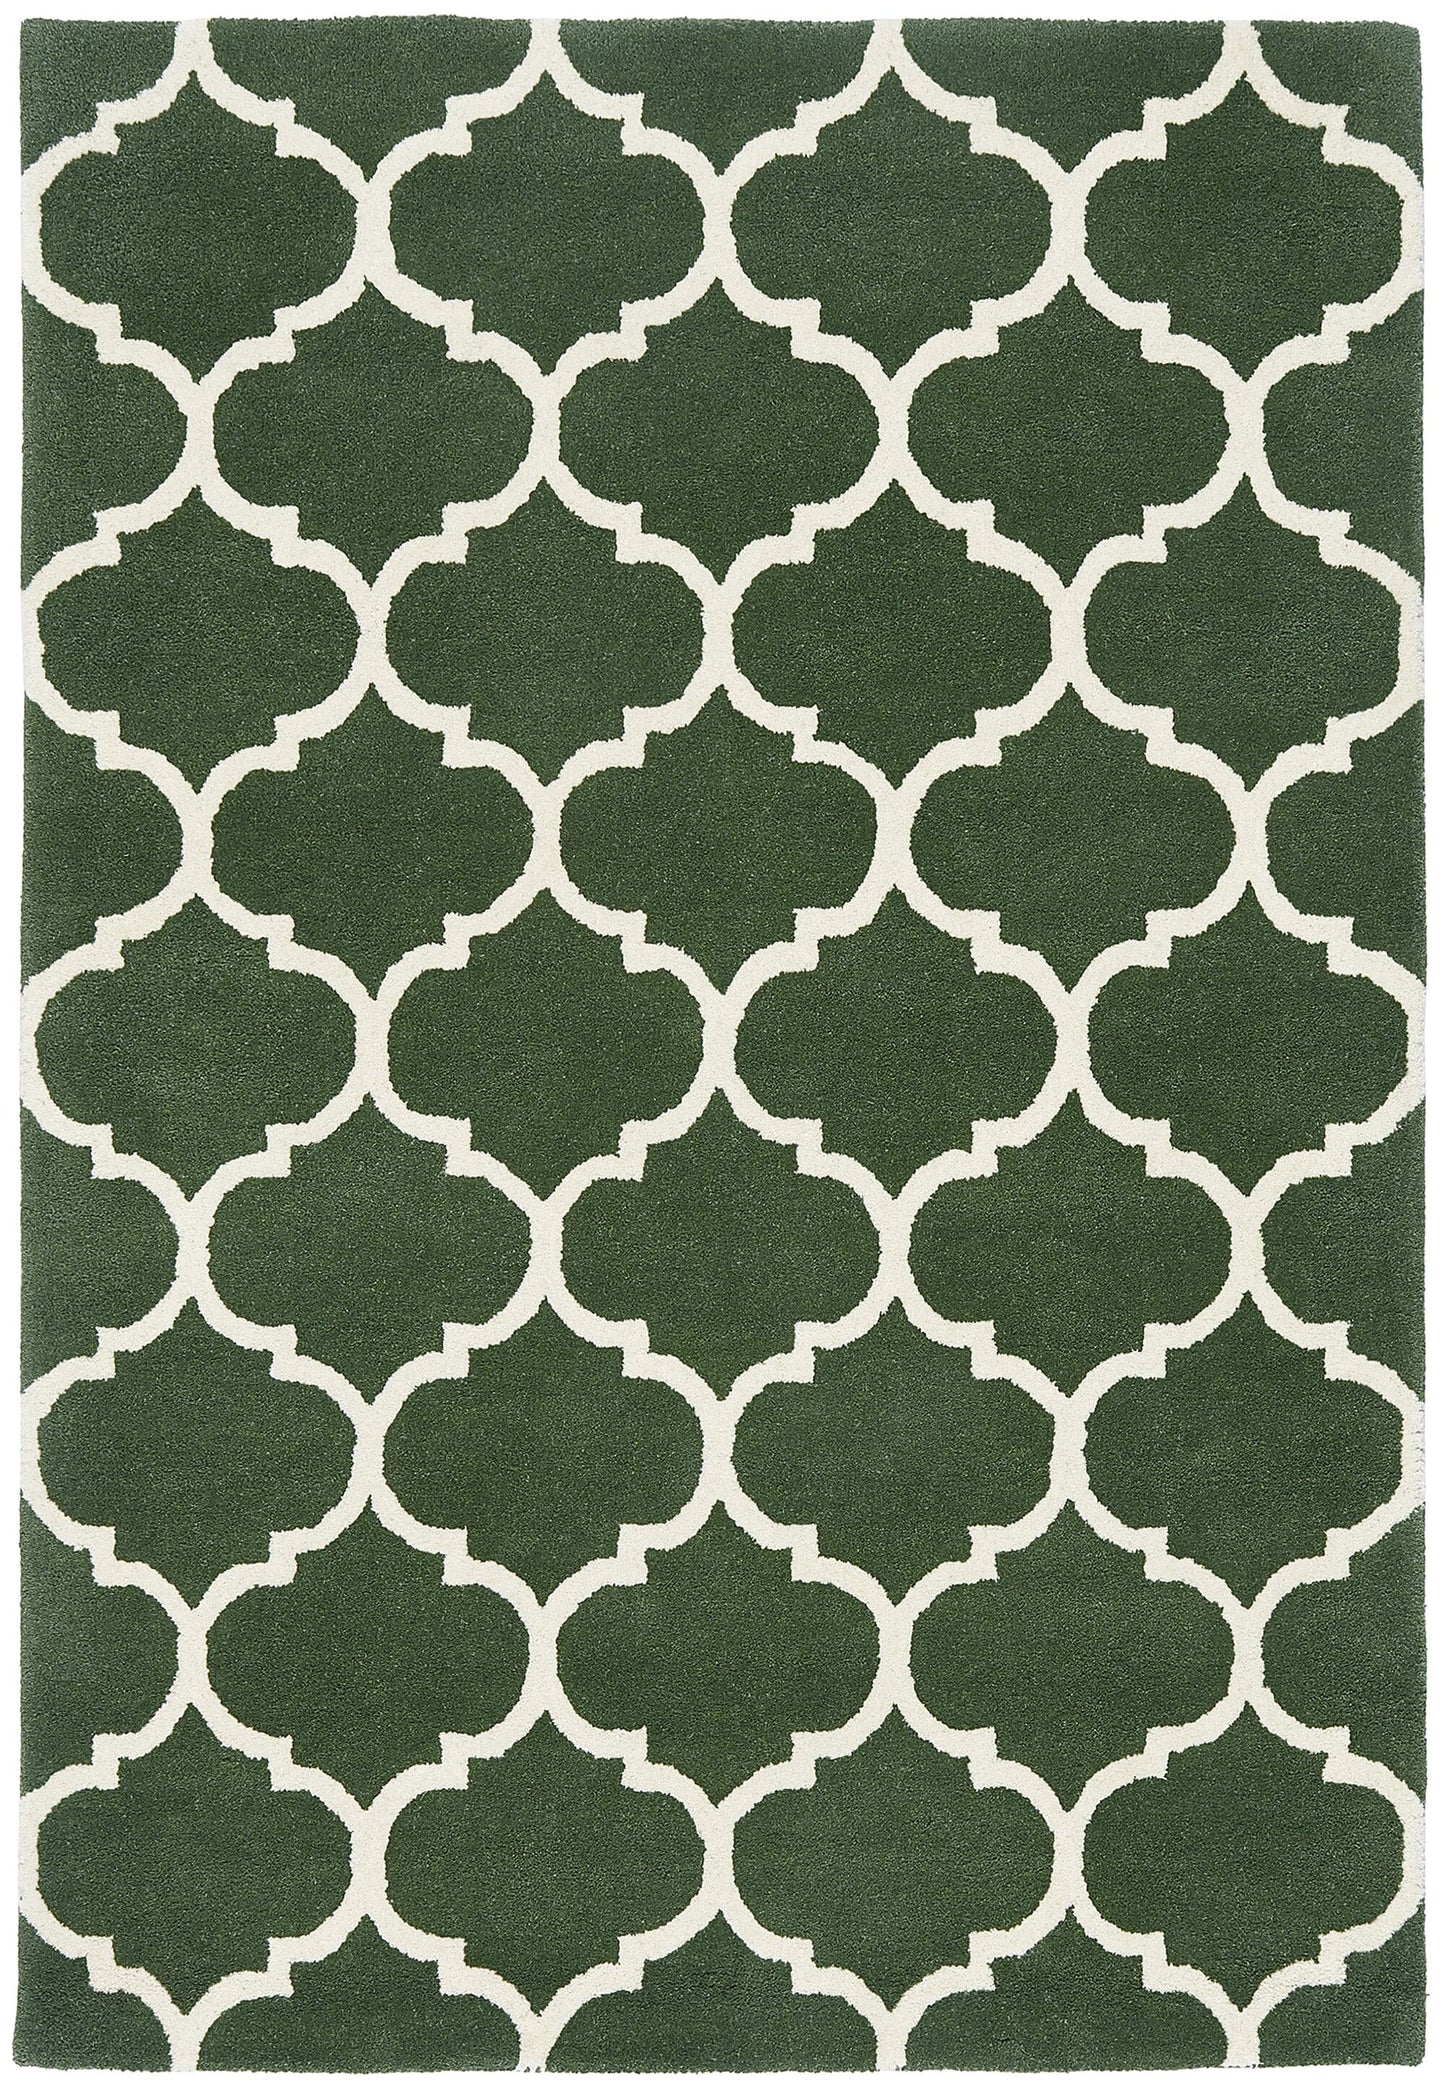 Asiatic Carpets Albany Handtufted Rug Ogee Green - 80 x 150cm